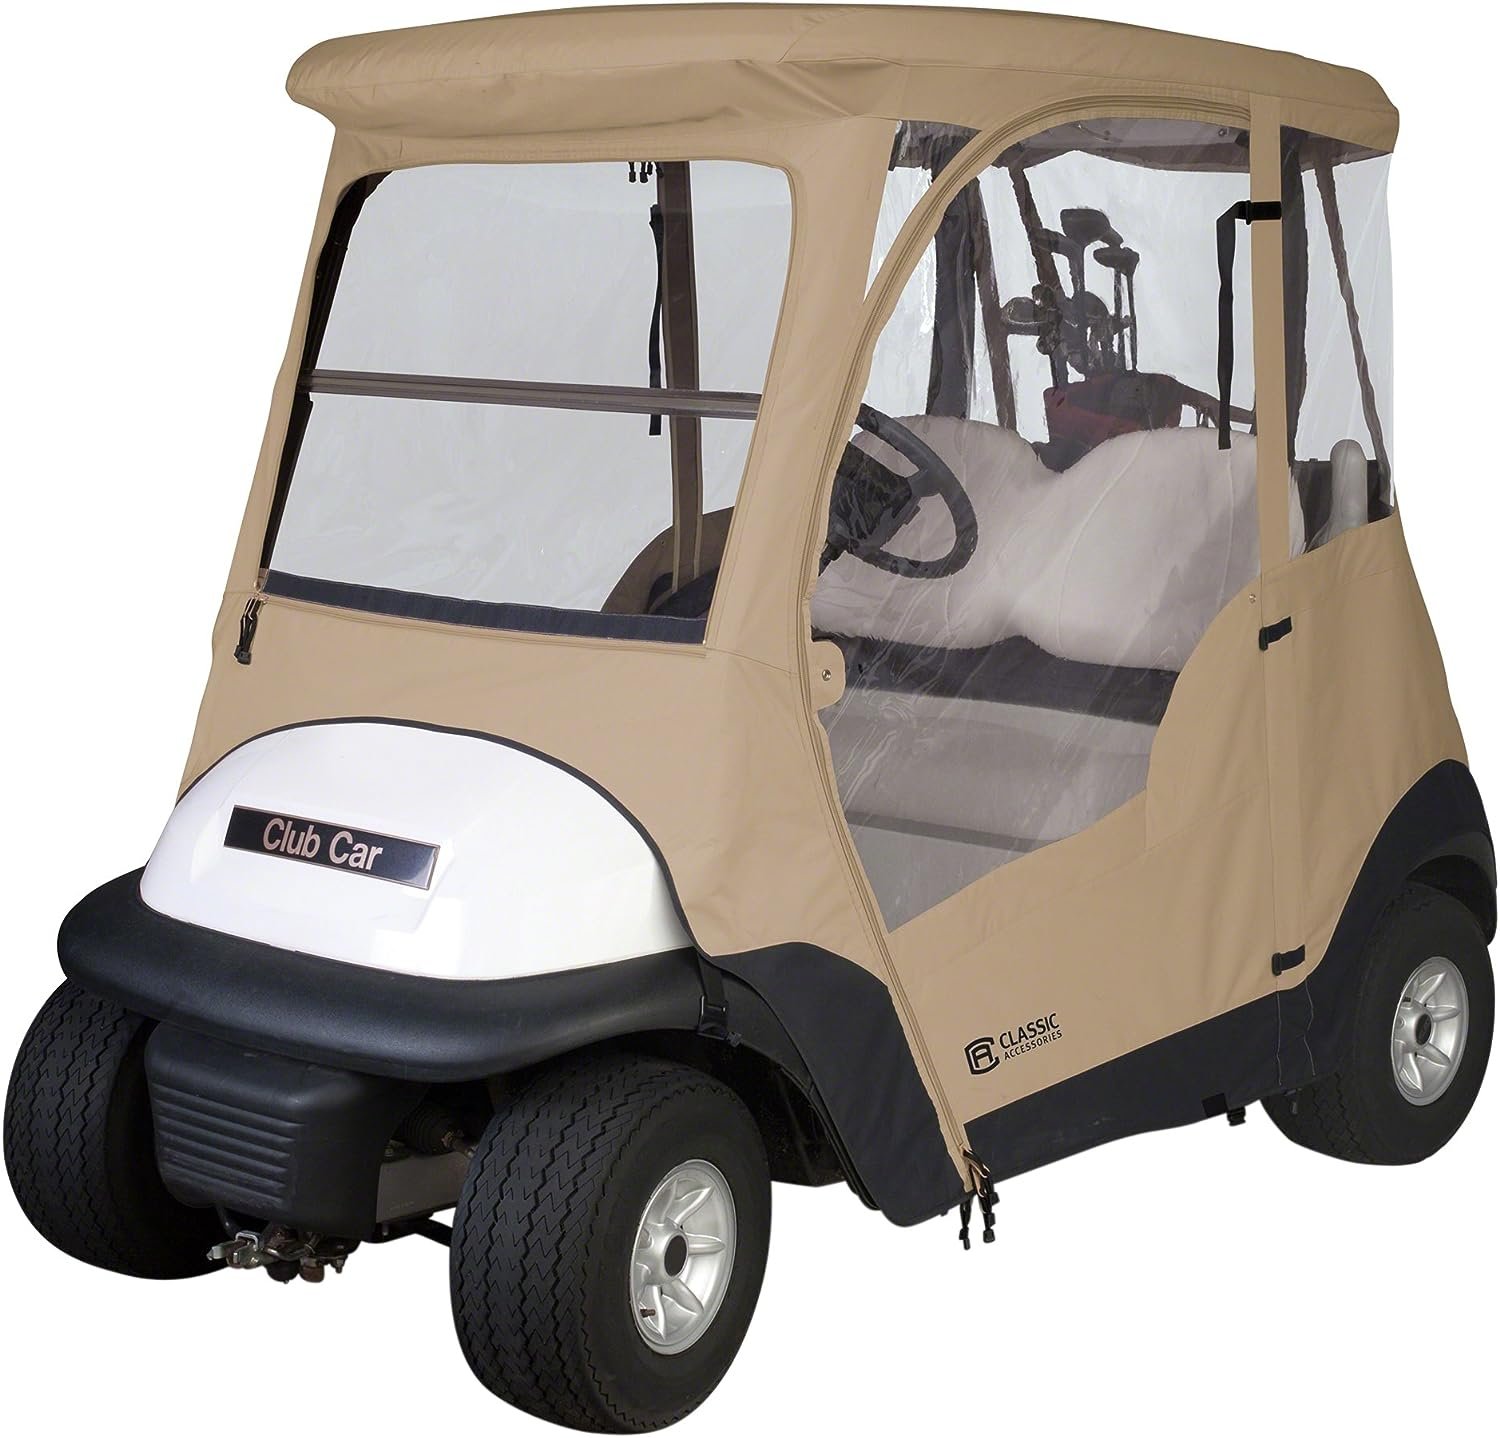 Classic Accessories Fairway Deluxe 4-Sided 2-Person Golf Cart Enclosure For Club Car, Tan